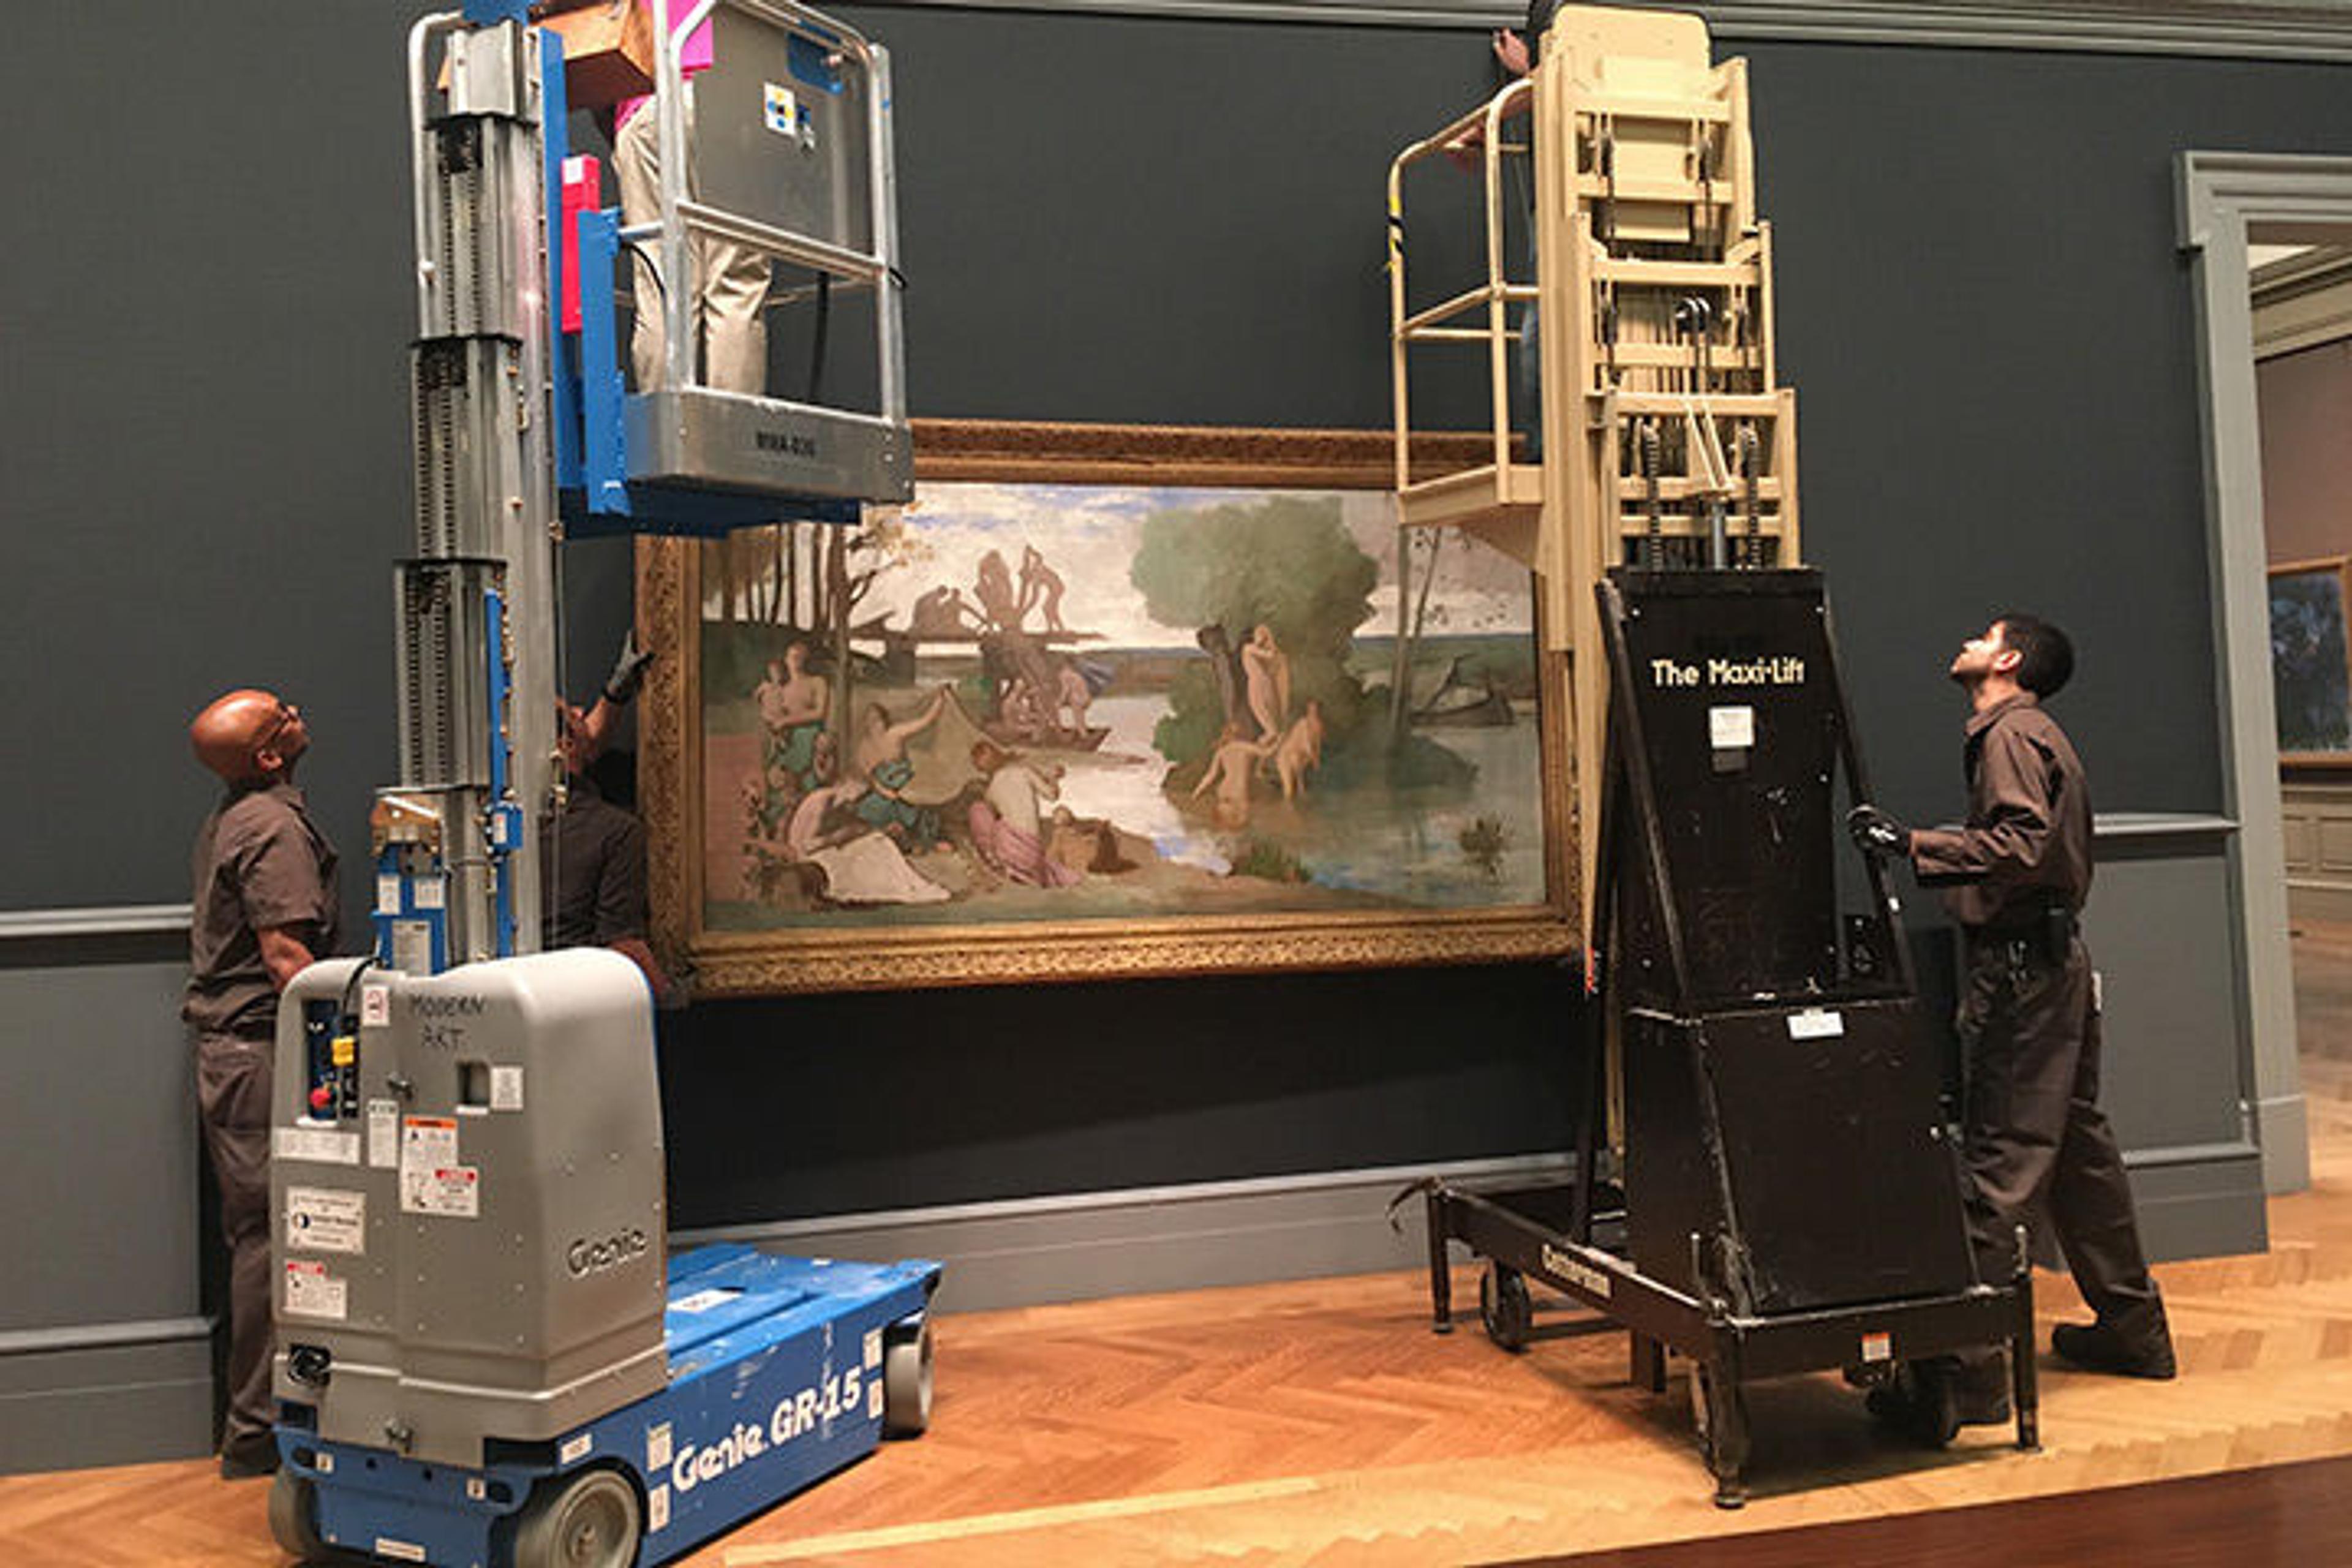 Excitement builds as art begins to repopulate the gallery. Here, painting technicians and riggers install a painting called The River by Rodin's friend Puvis de Chavannes on the gallery's south wall